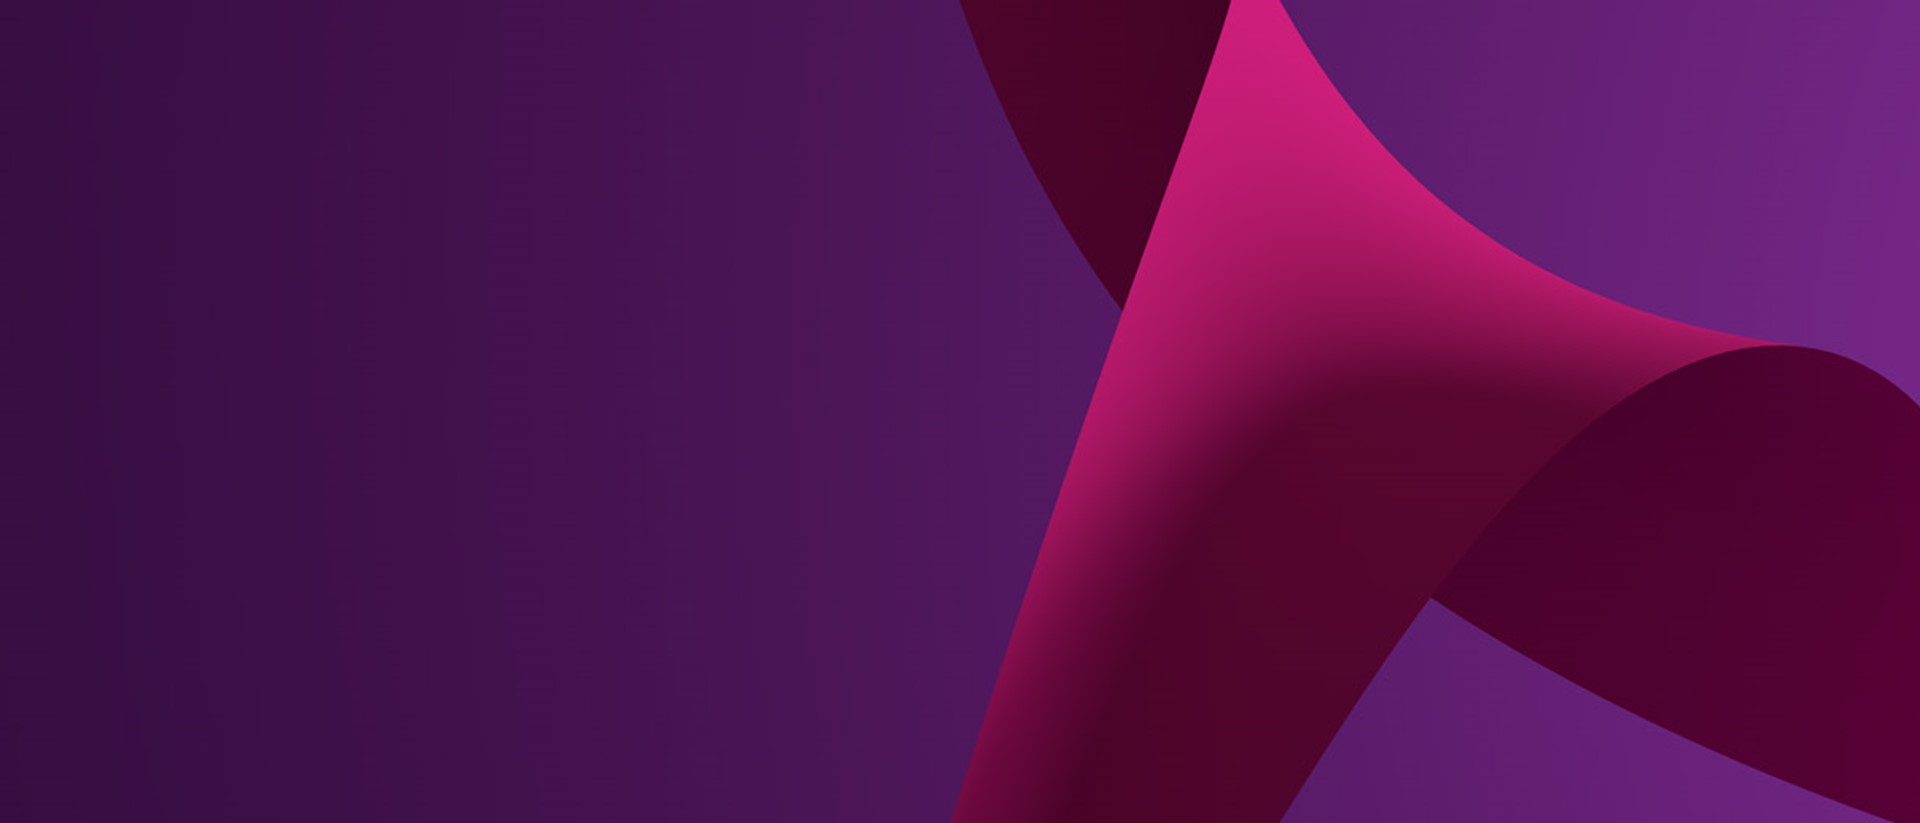 One of 7IM's brand shapes in purple and pink